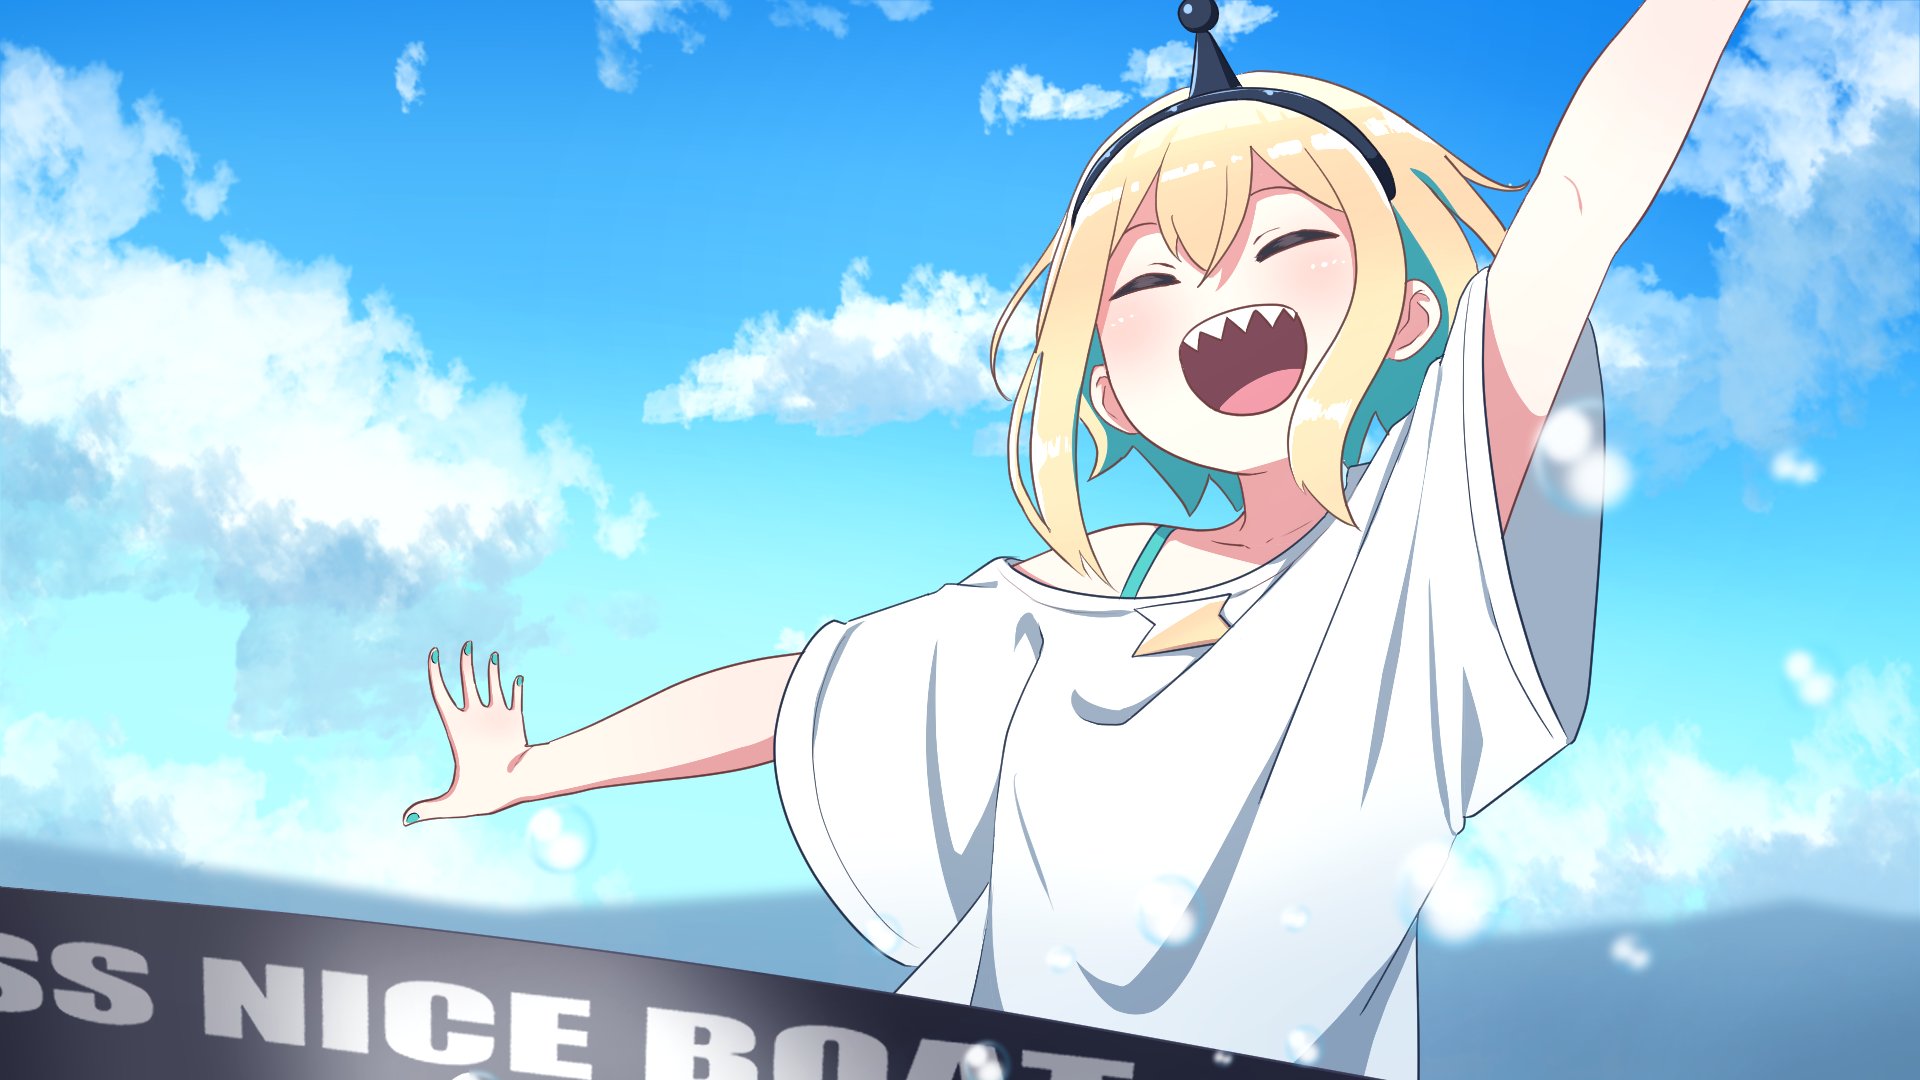 Pikamee Smiling Boat Clear Sky Blonde Virtual Youtuber T Shirt Antenna Anime Girls Closed Eyes Cloud 1920x1080